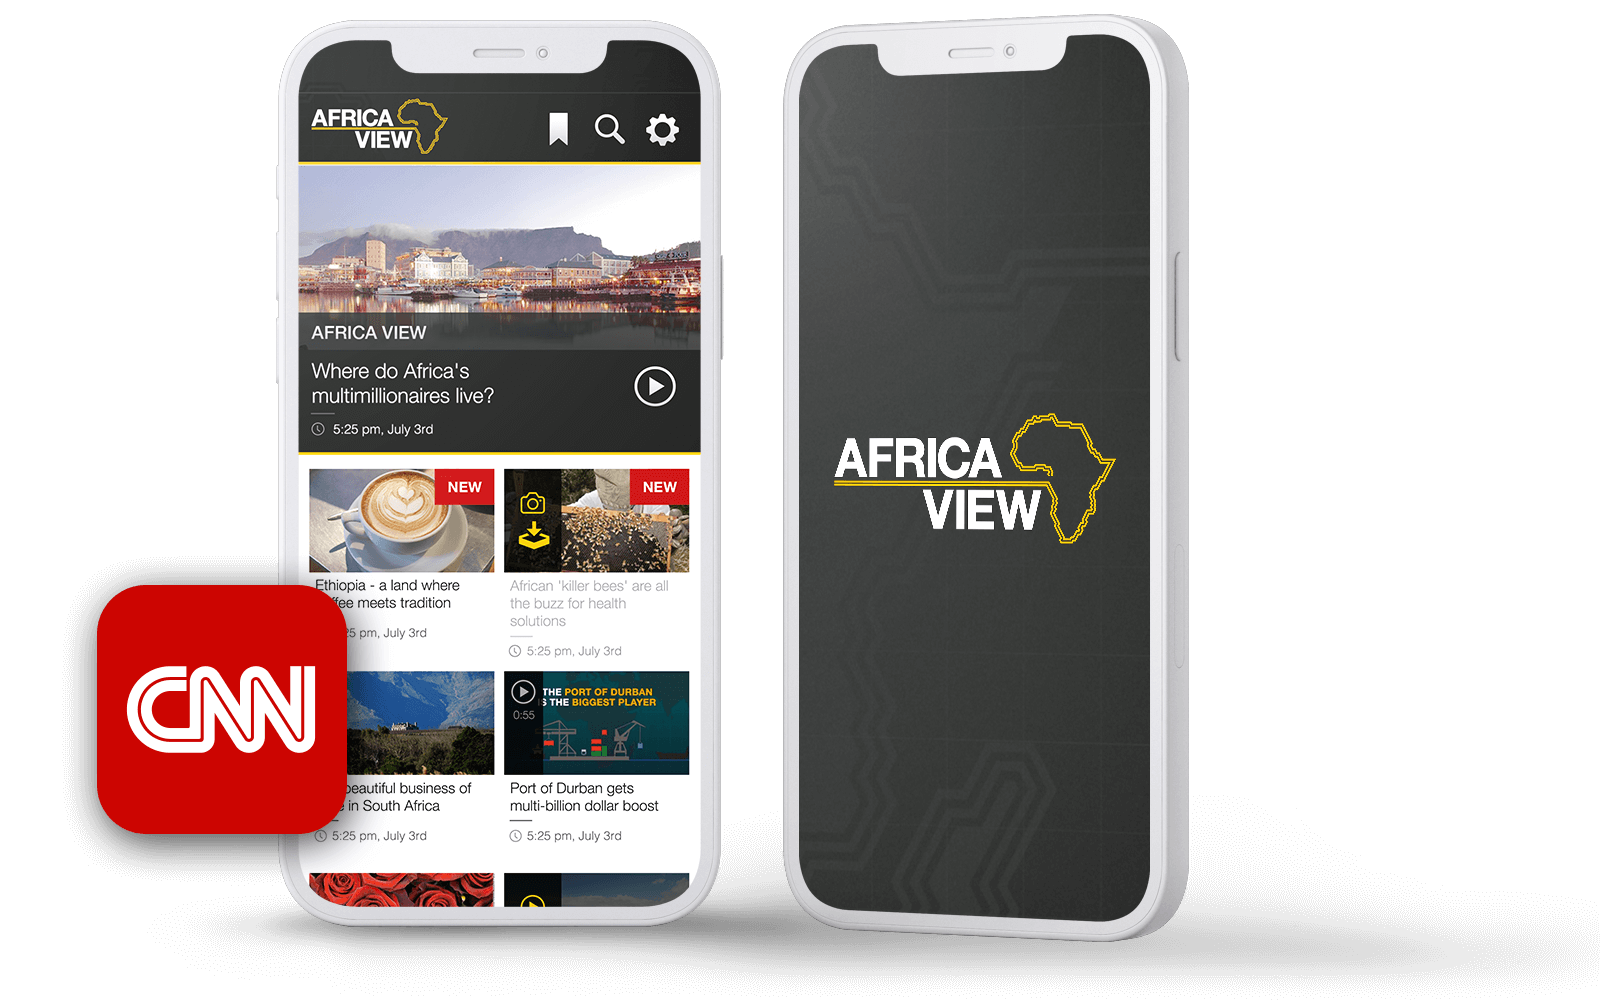 CNN Africa View app on mobile.